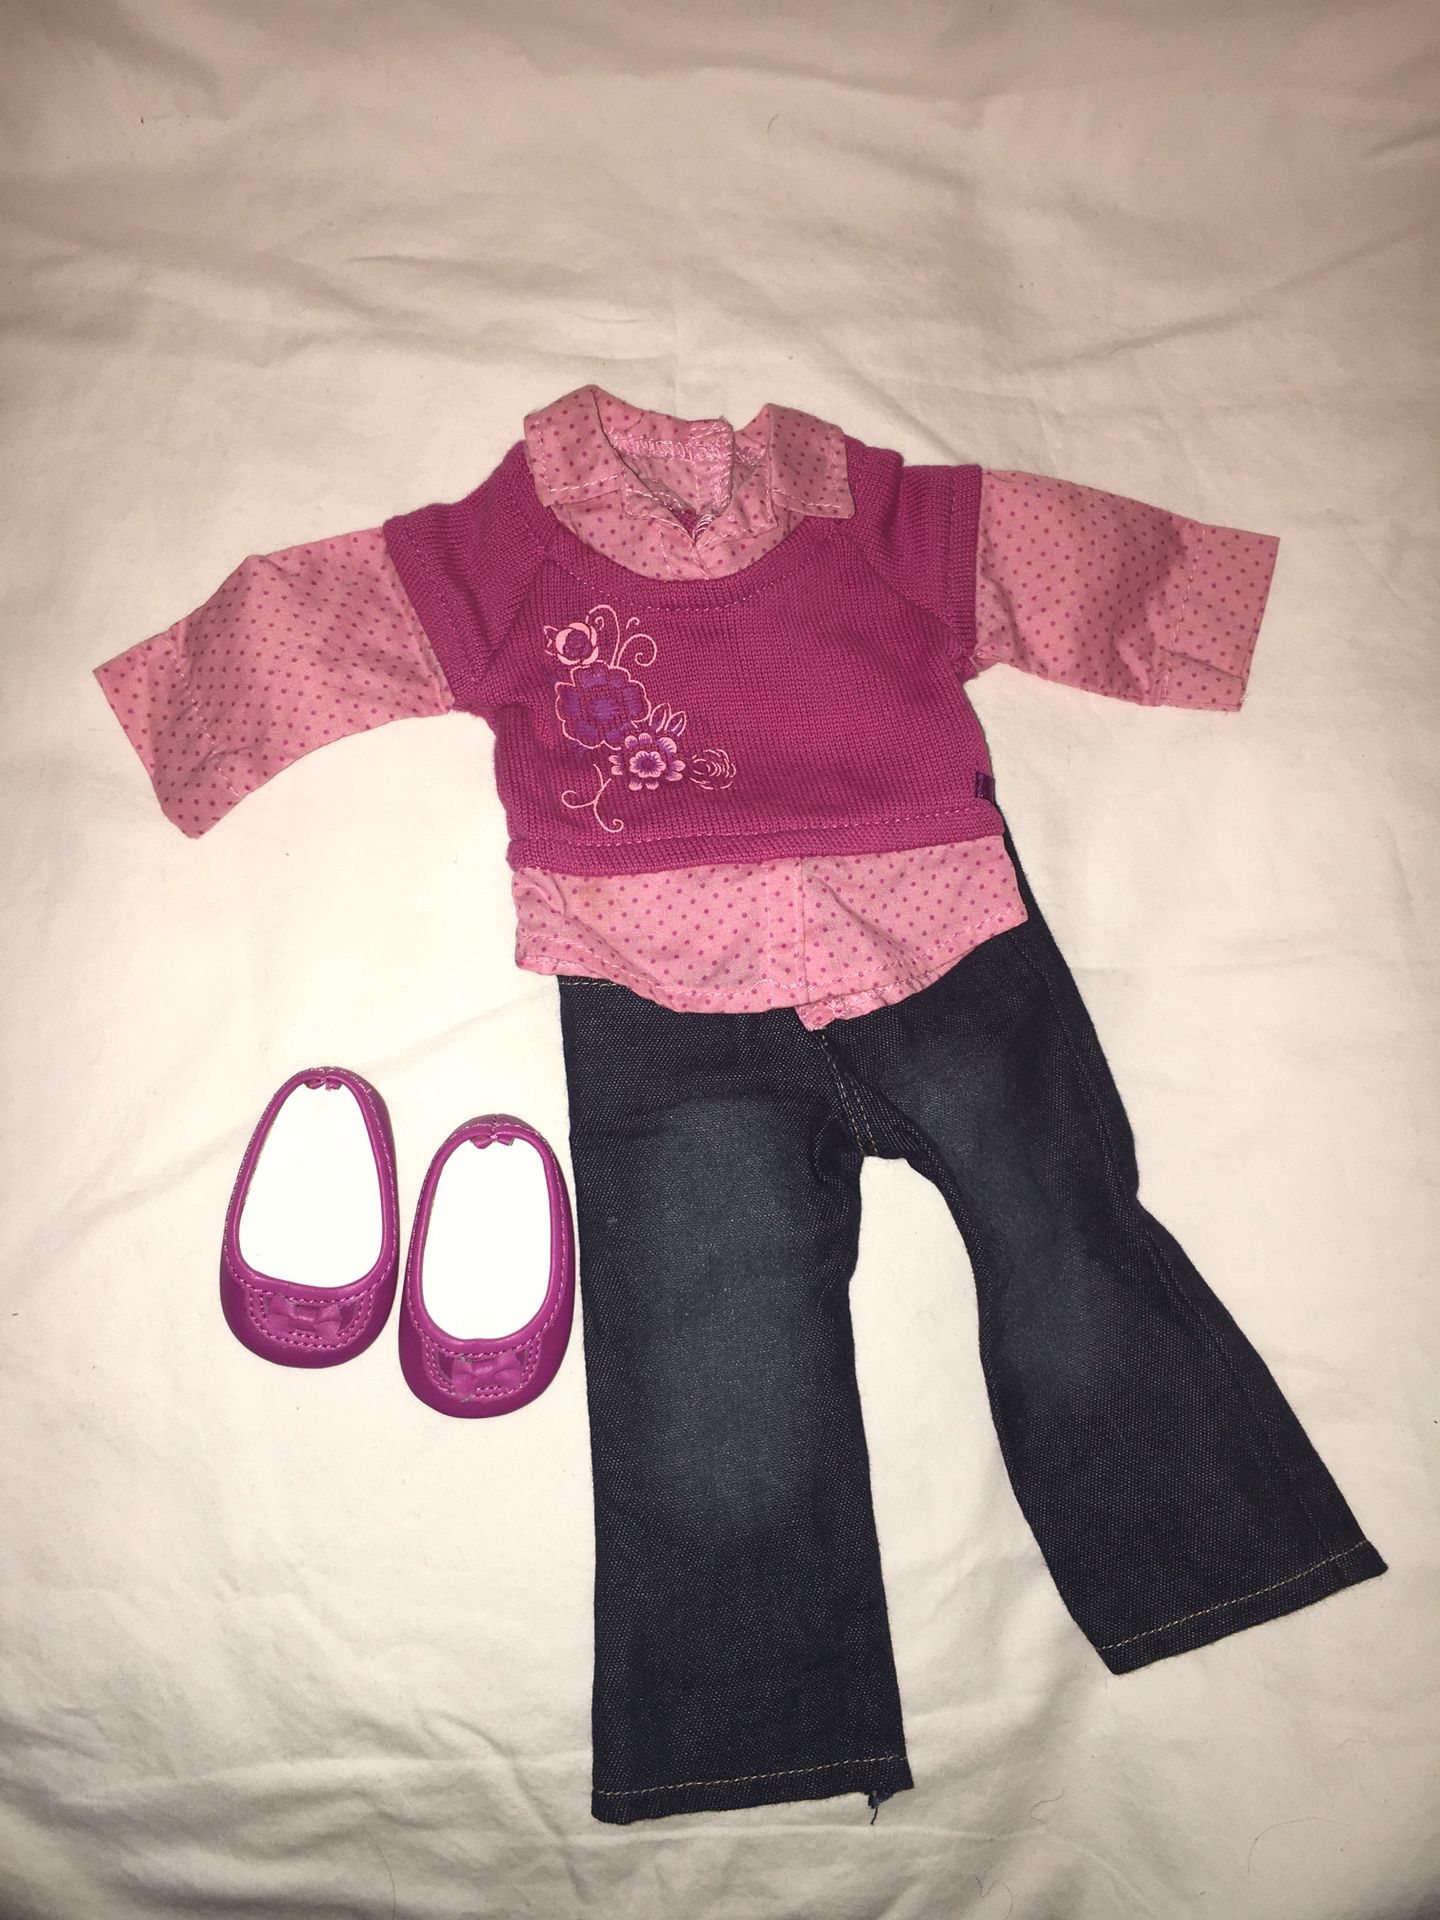 American Girl Doll School Outfit